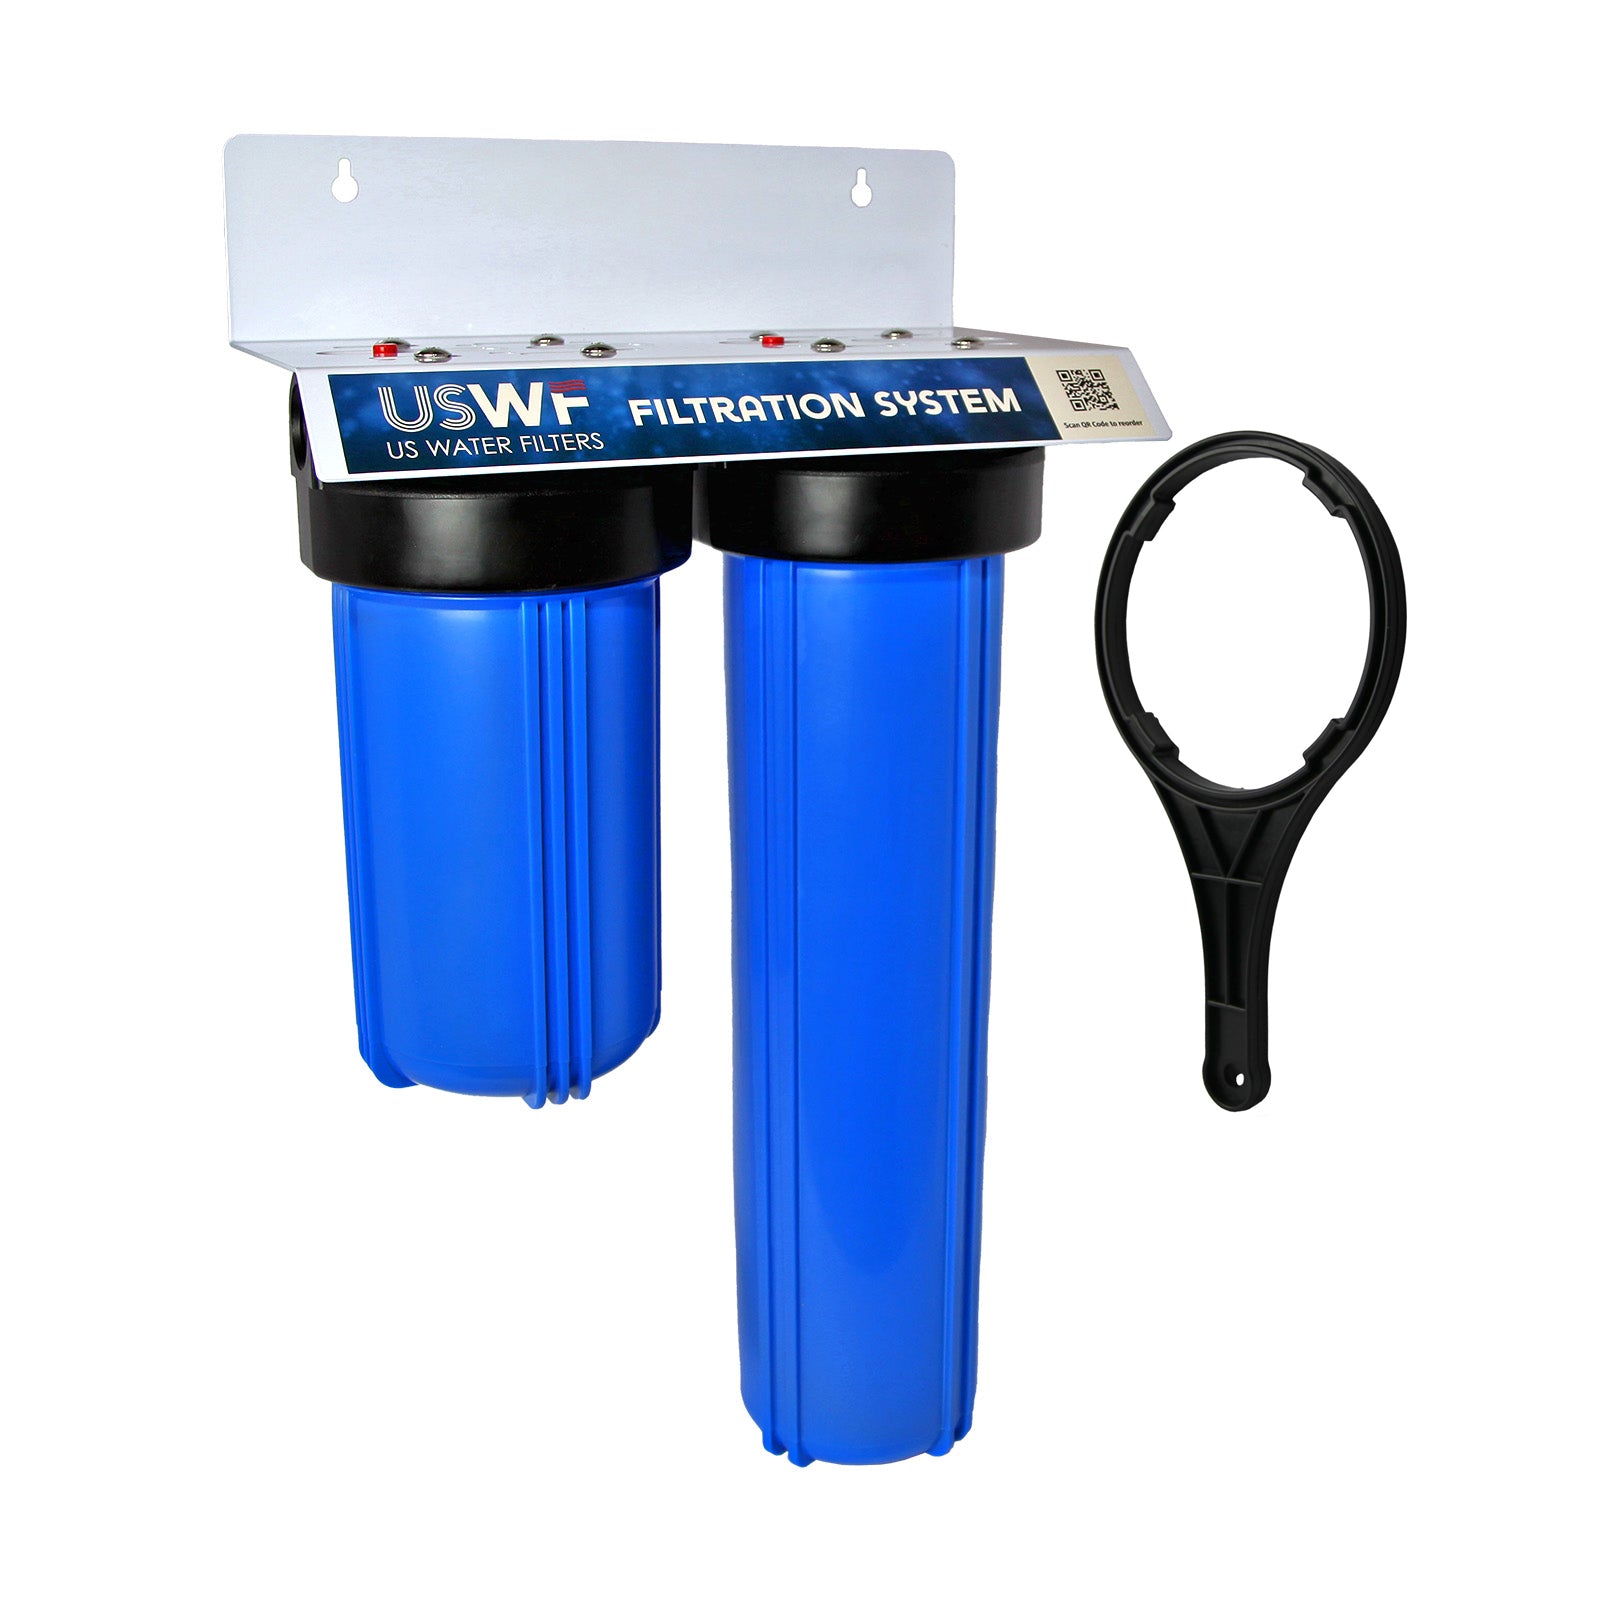 Two-Stage Big Blue 4.5"x10" & 20"  Filter Housing by USWF, 3/4" Inlet/Outlet, w/mounting bracket & wrench